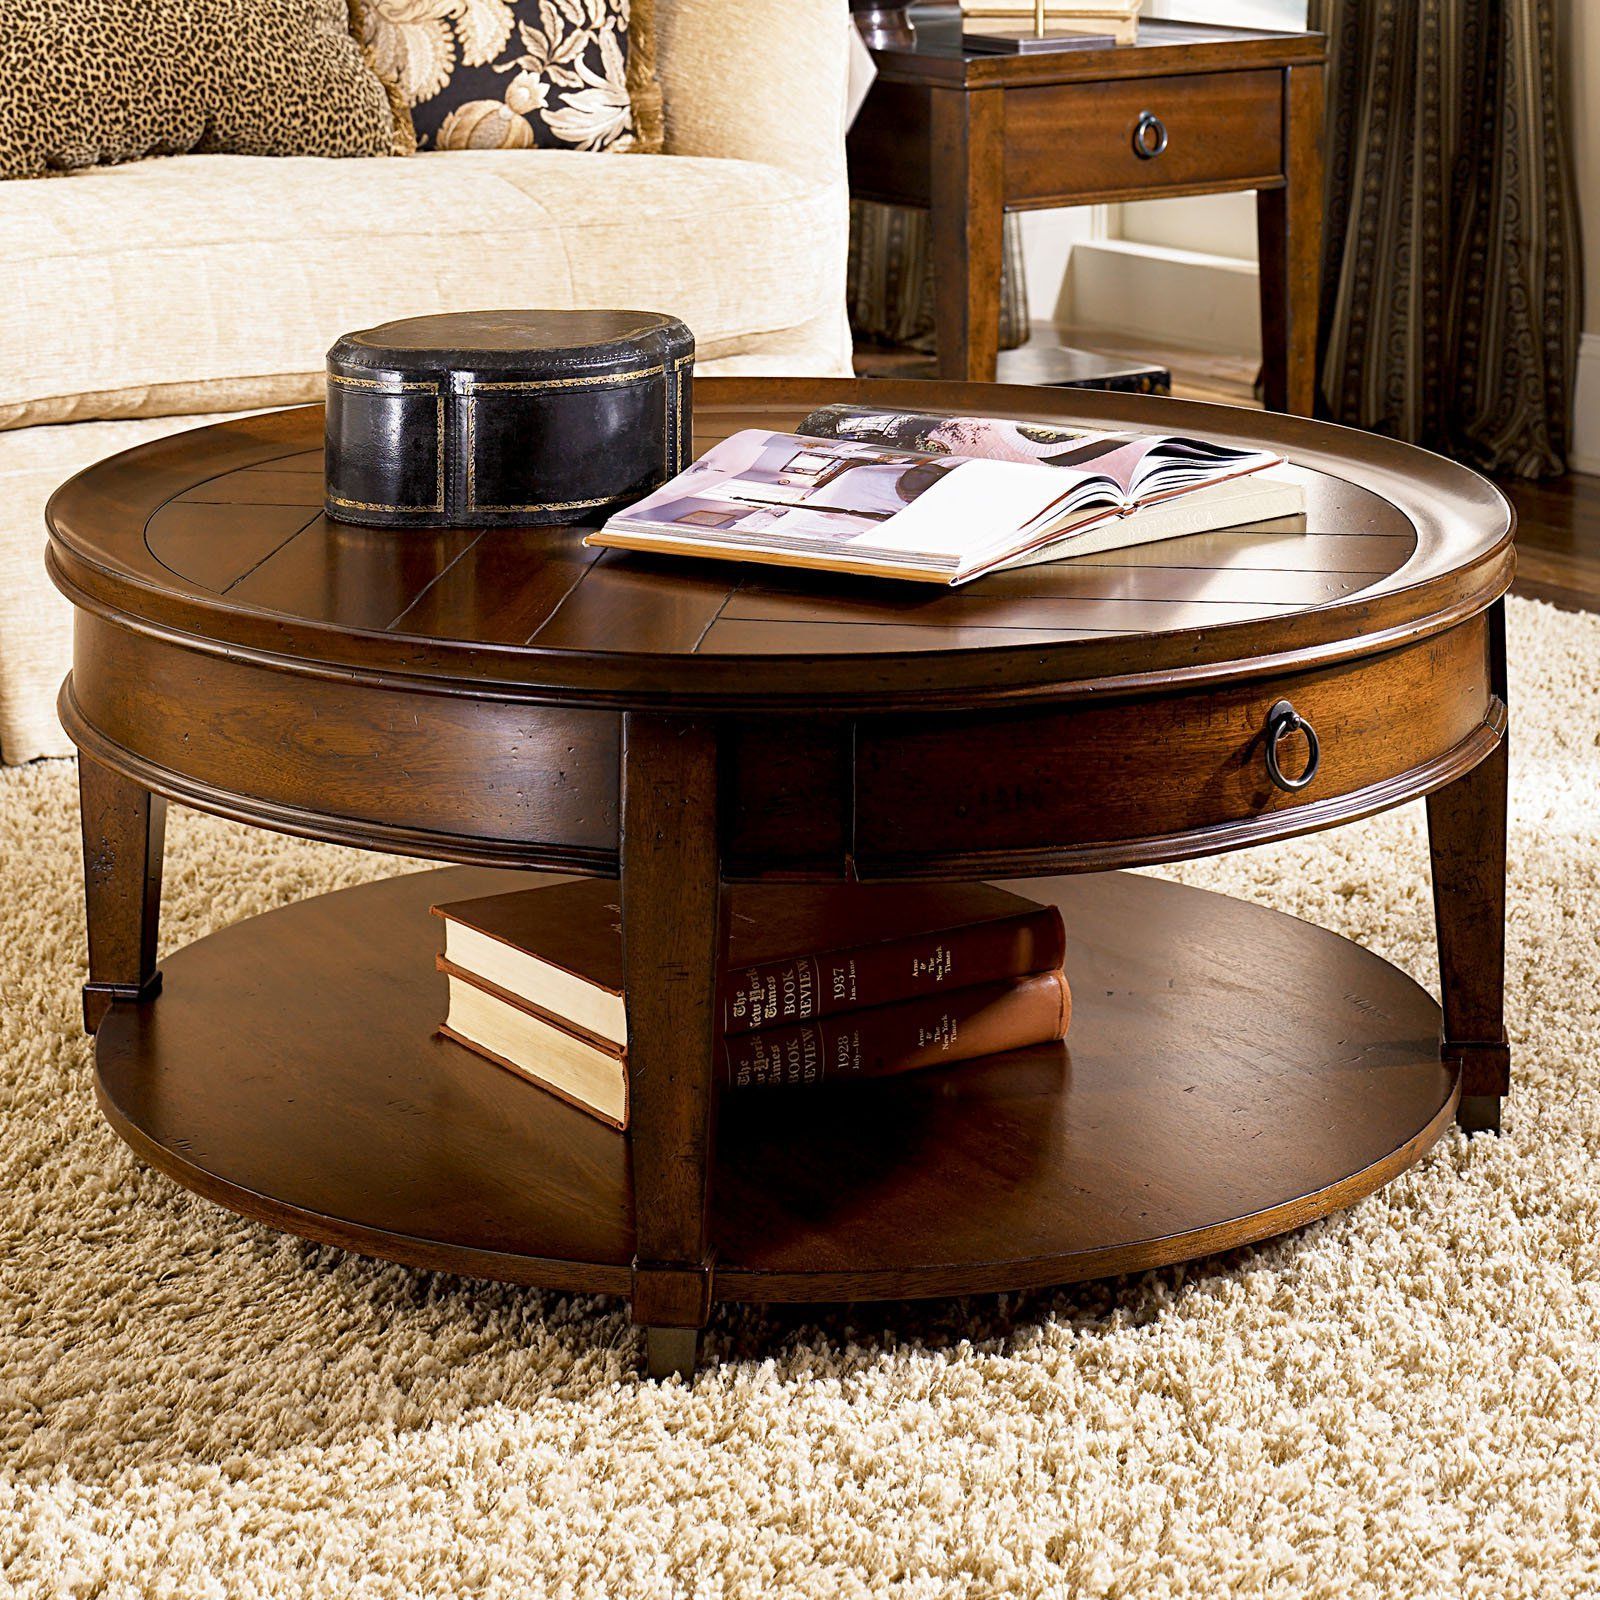 Hammary Sunset Valley Round Cocktail Table – Rich Mahogany | Mahogany Intended For American Heritage Round Coffee Tables (View 16 of 20)